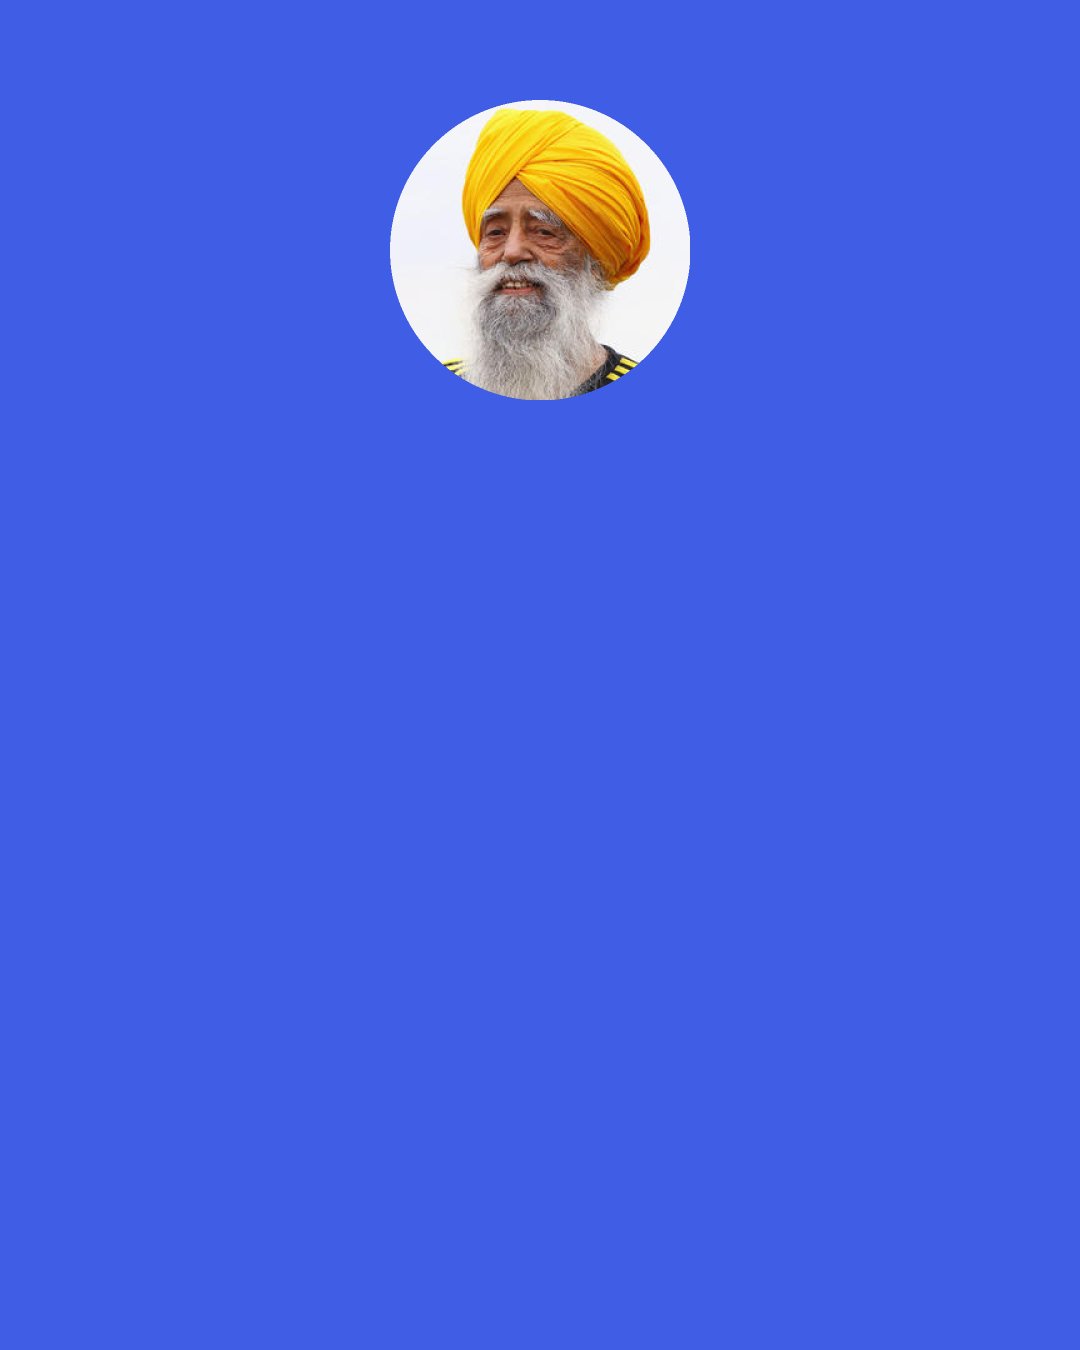 Fauja Singh: Laughter and happiness is what life should be about, that’s your remedy for everything.